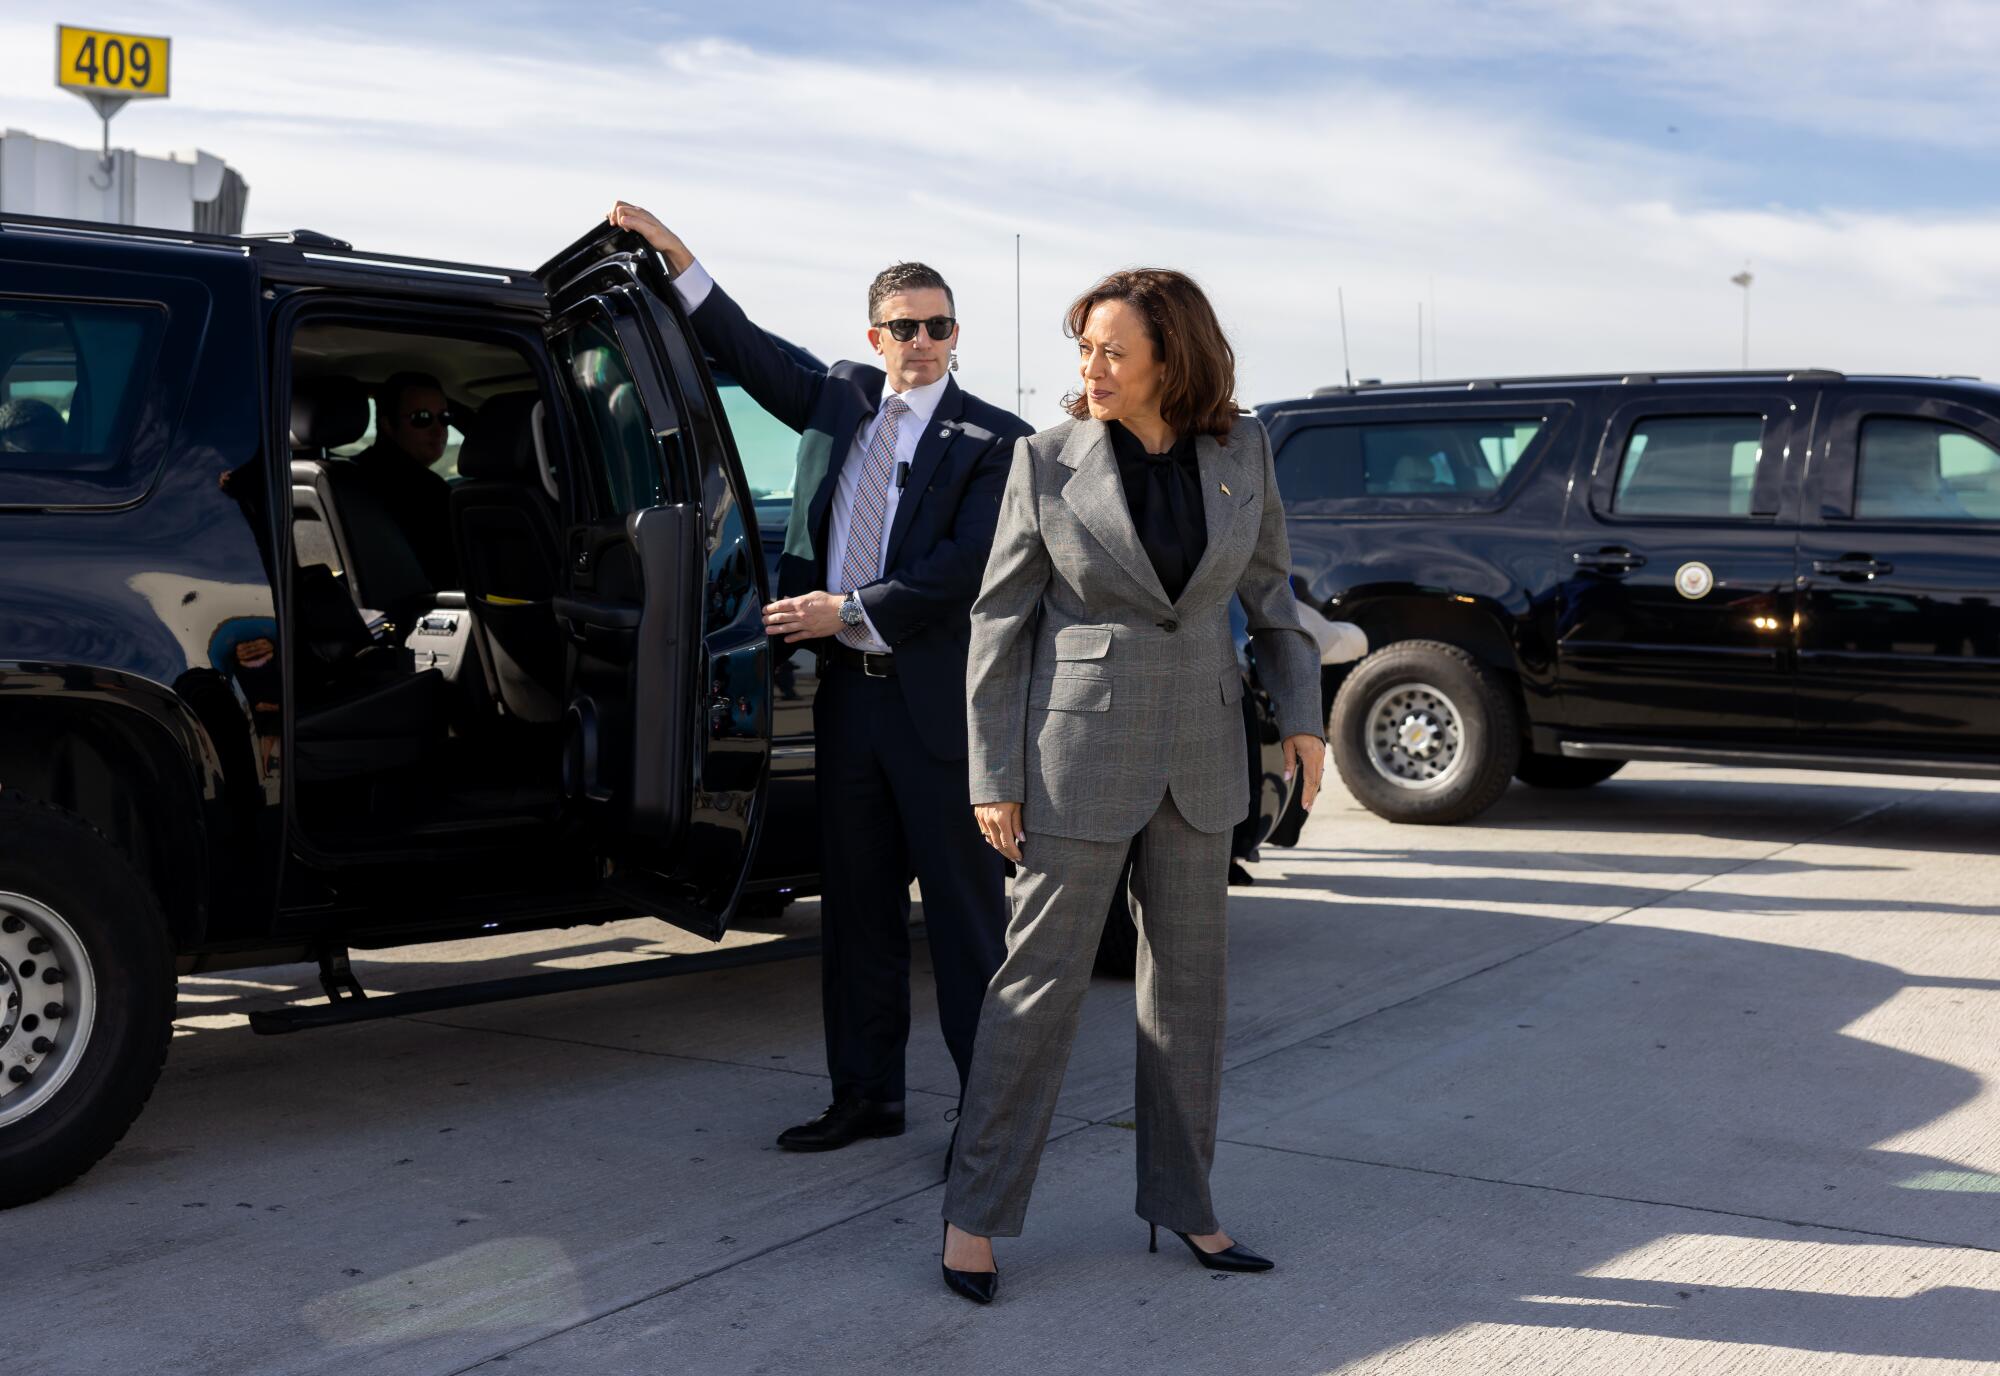 Vice President Kamala Harris stands outside a black SUV with a door opened by a man. Another black SUV is in the background.